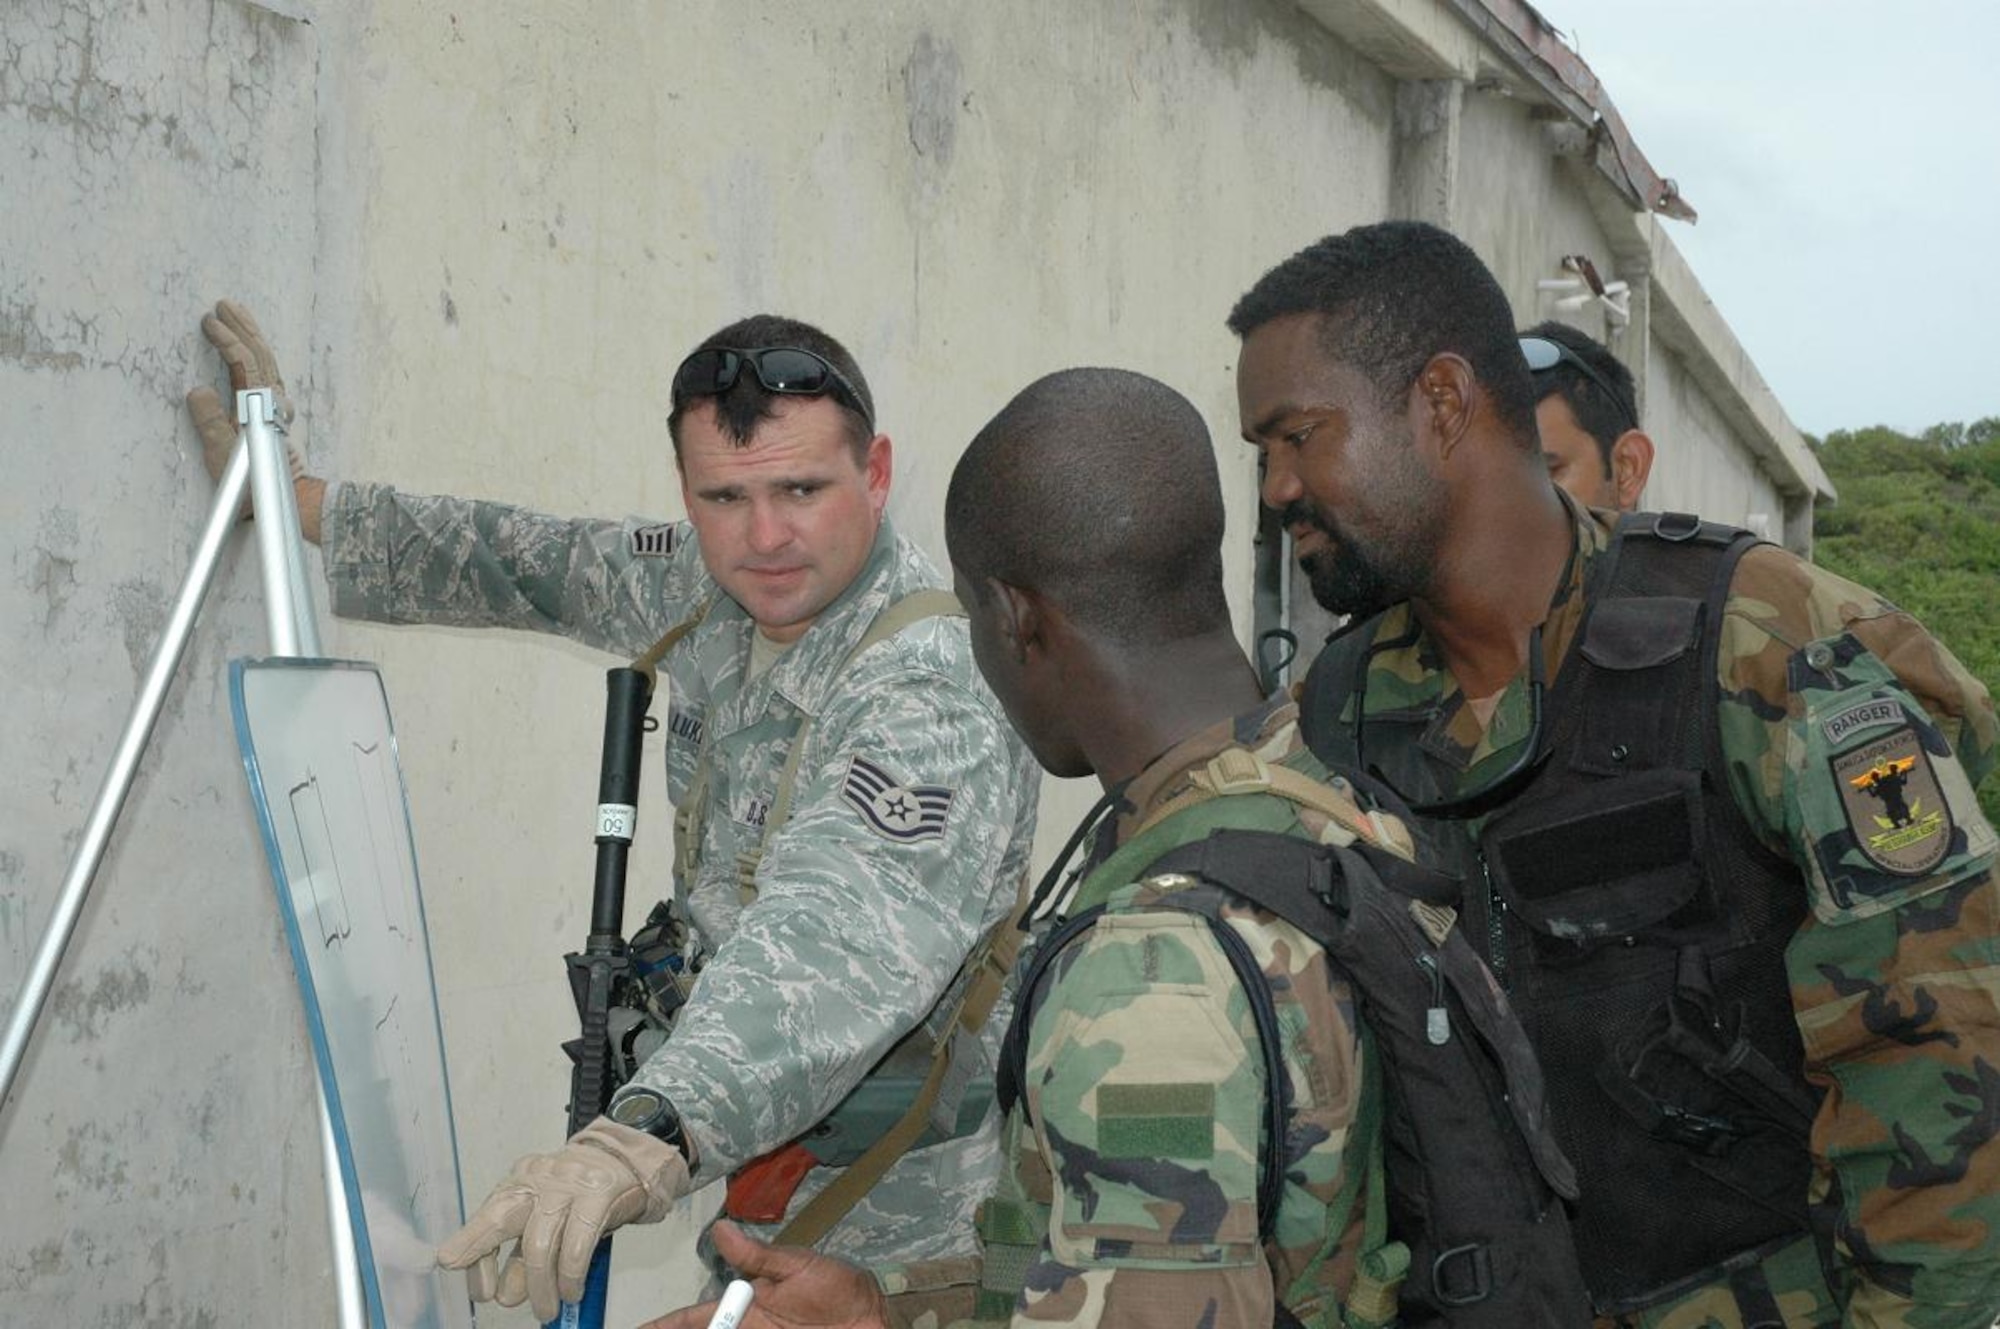 Staff Sgt. Kyle Luker (far left), 820th Security Forces Group, Moody
AFB, GA, provides instruction on building entry procedures to 2nd Lt. Javan
Simpson (center), and Sgt. Otis Harris, 3rd Battalion, Jamaican Defense
Force, during Close Quarters Battle training Monday near Kingston, Jamaica.
Luker and more than 60 other personnel of various specialties are
participating in Operation Southern Partner, a cooperative exchange program
between the U.S Air Force and the defense forces of Belize, Jamaica,
Grenada, Guyana, St. Lucia, Trinidad and Tobago. (U.S. Air Force photo by
Kevin Walston)